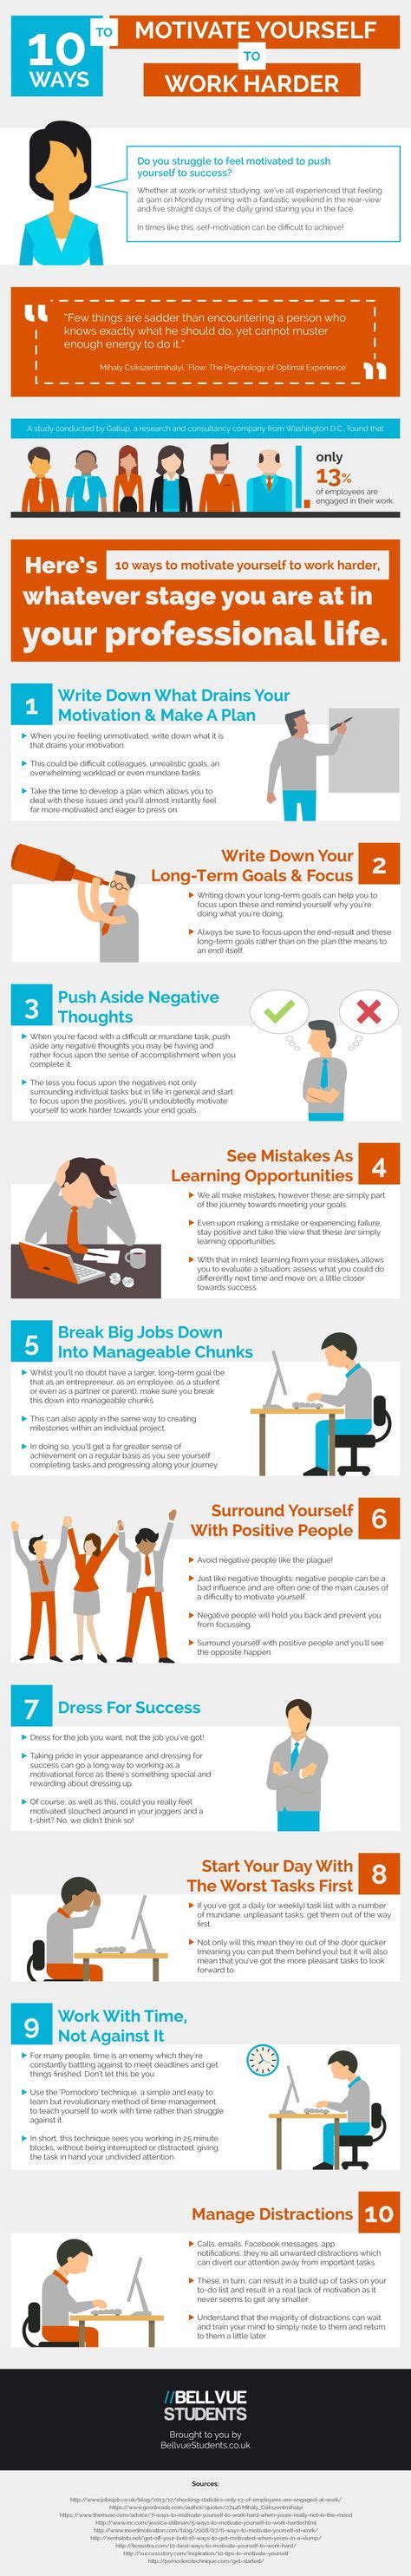 Ten Ways To Improve Your Motivation At Work Infographic How To Stay